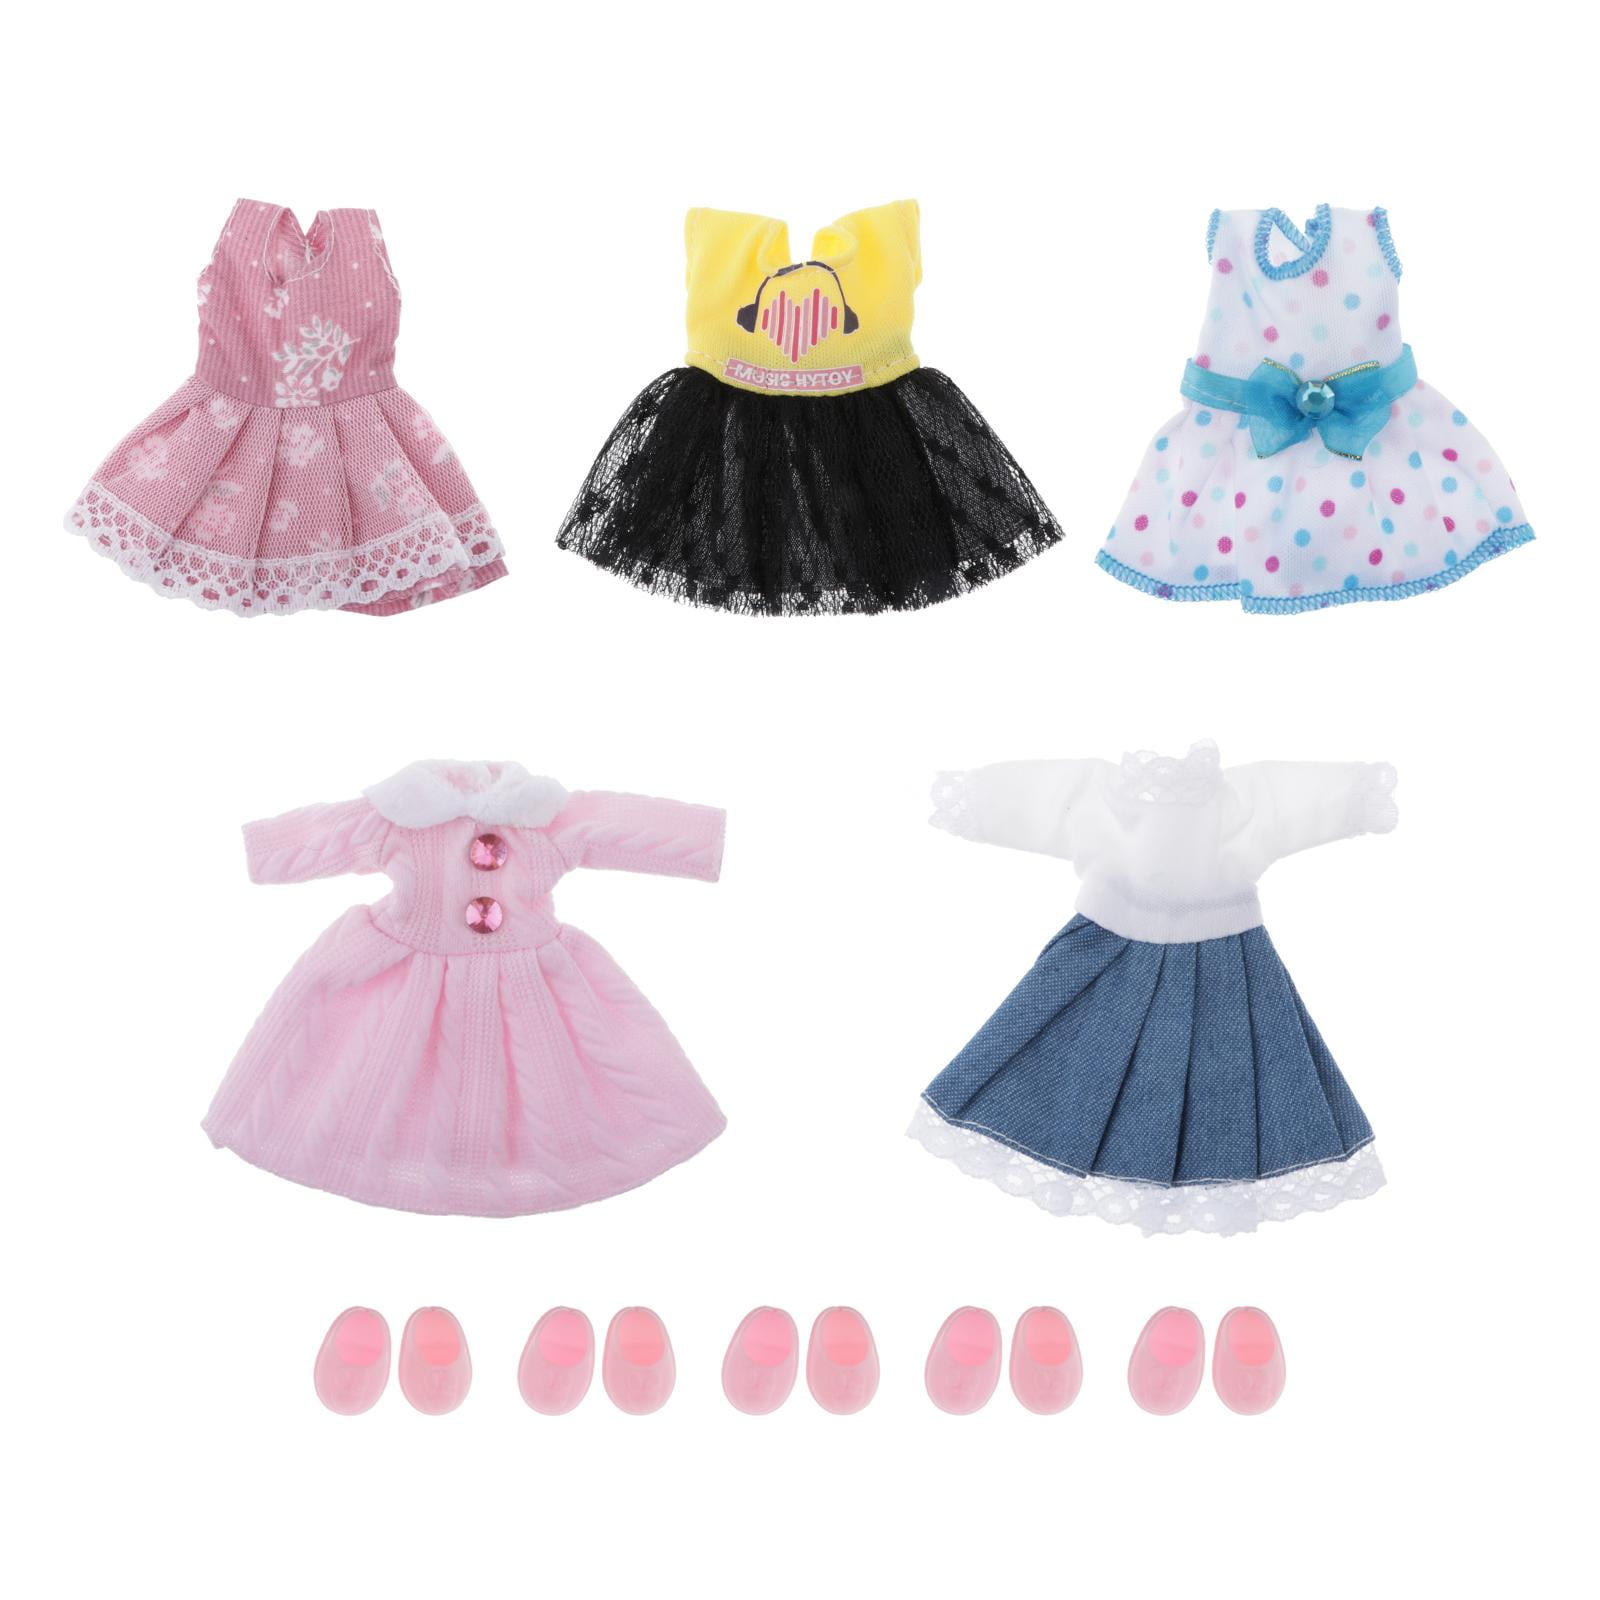  16 Pcs Girl Doll Clothes Lovely Outfits Mini Doll Clothes 6  Inch Dolls Clothes and Accessories for Kids Birthday Outfit (Girls) : Toys  & Games